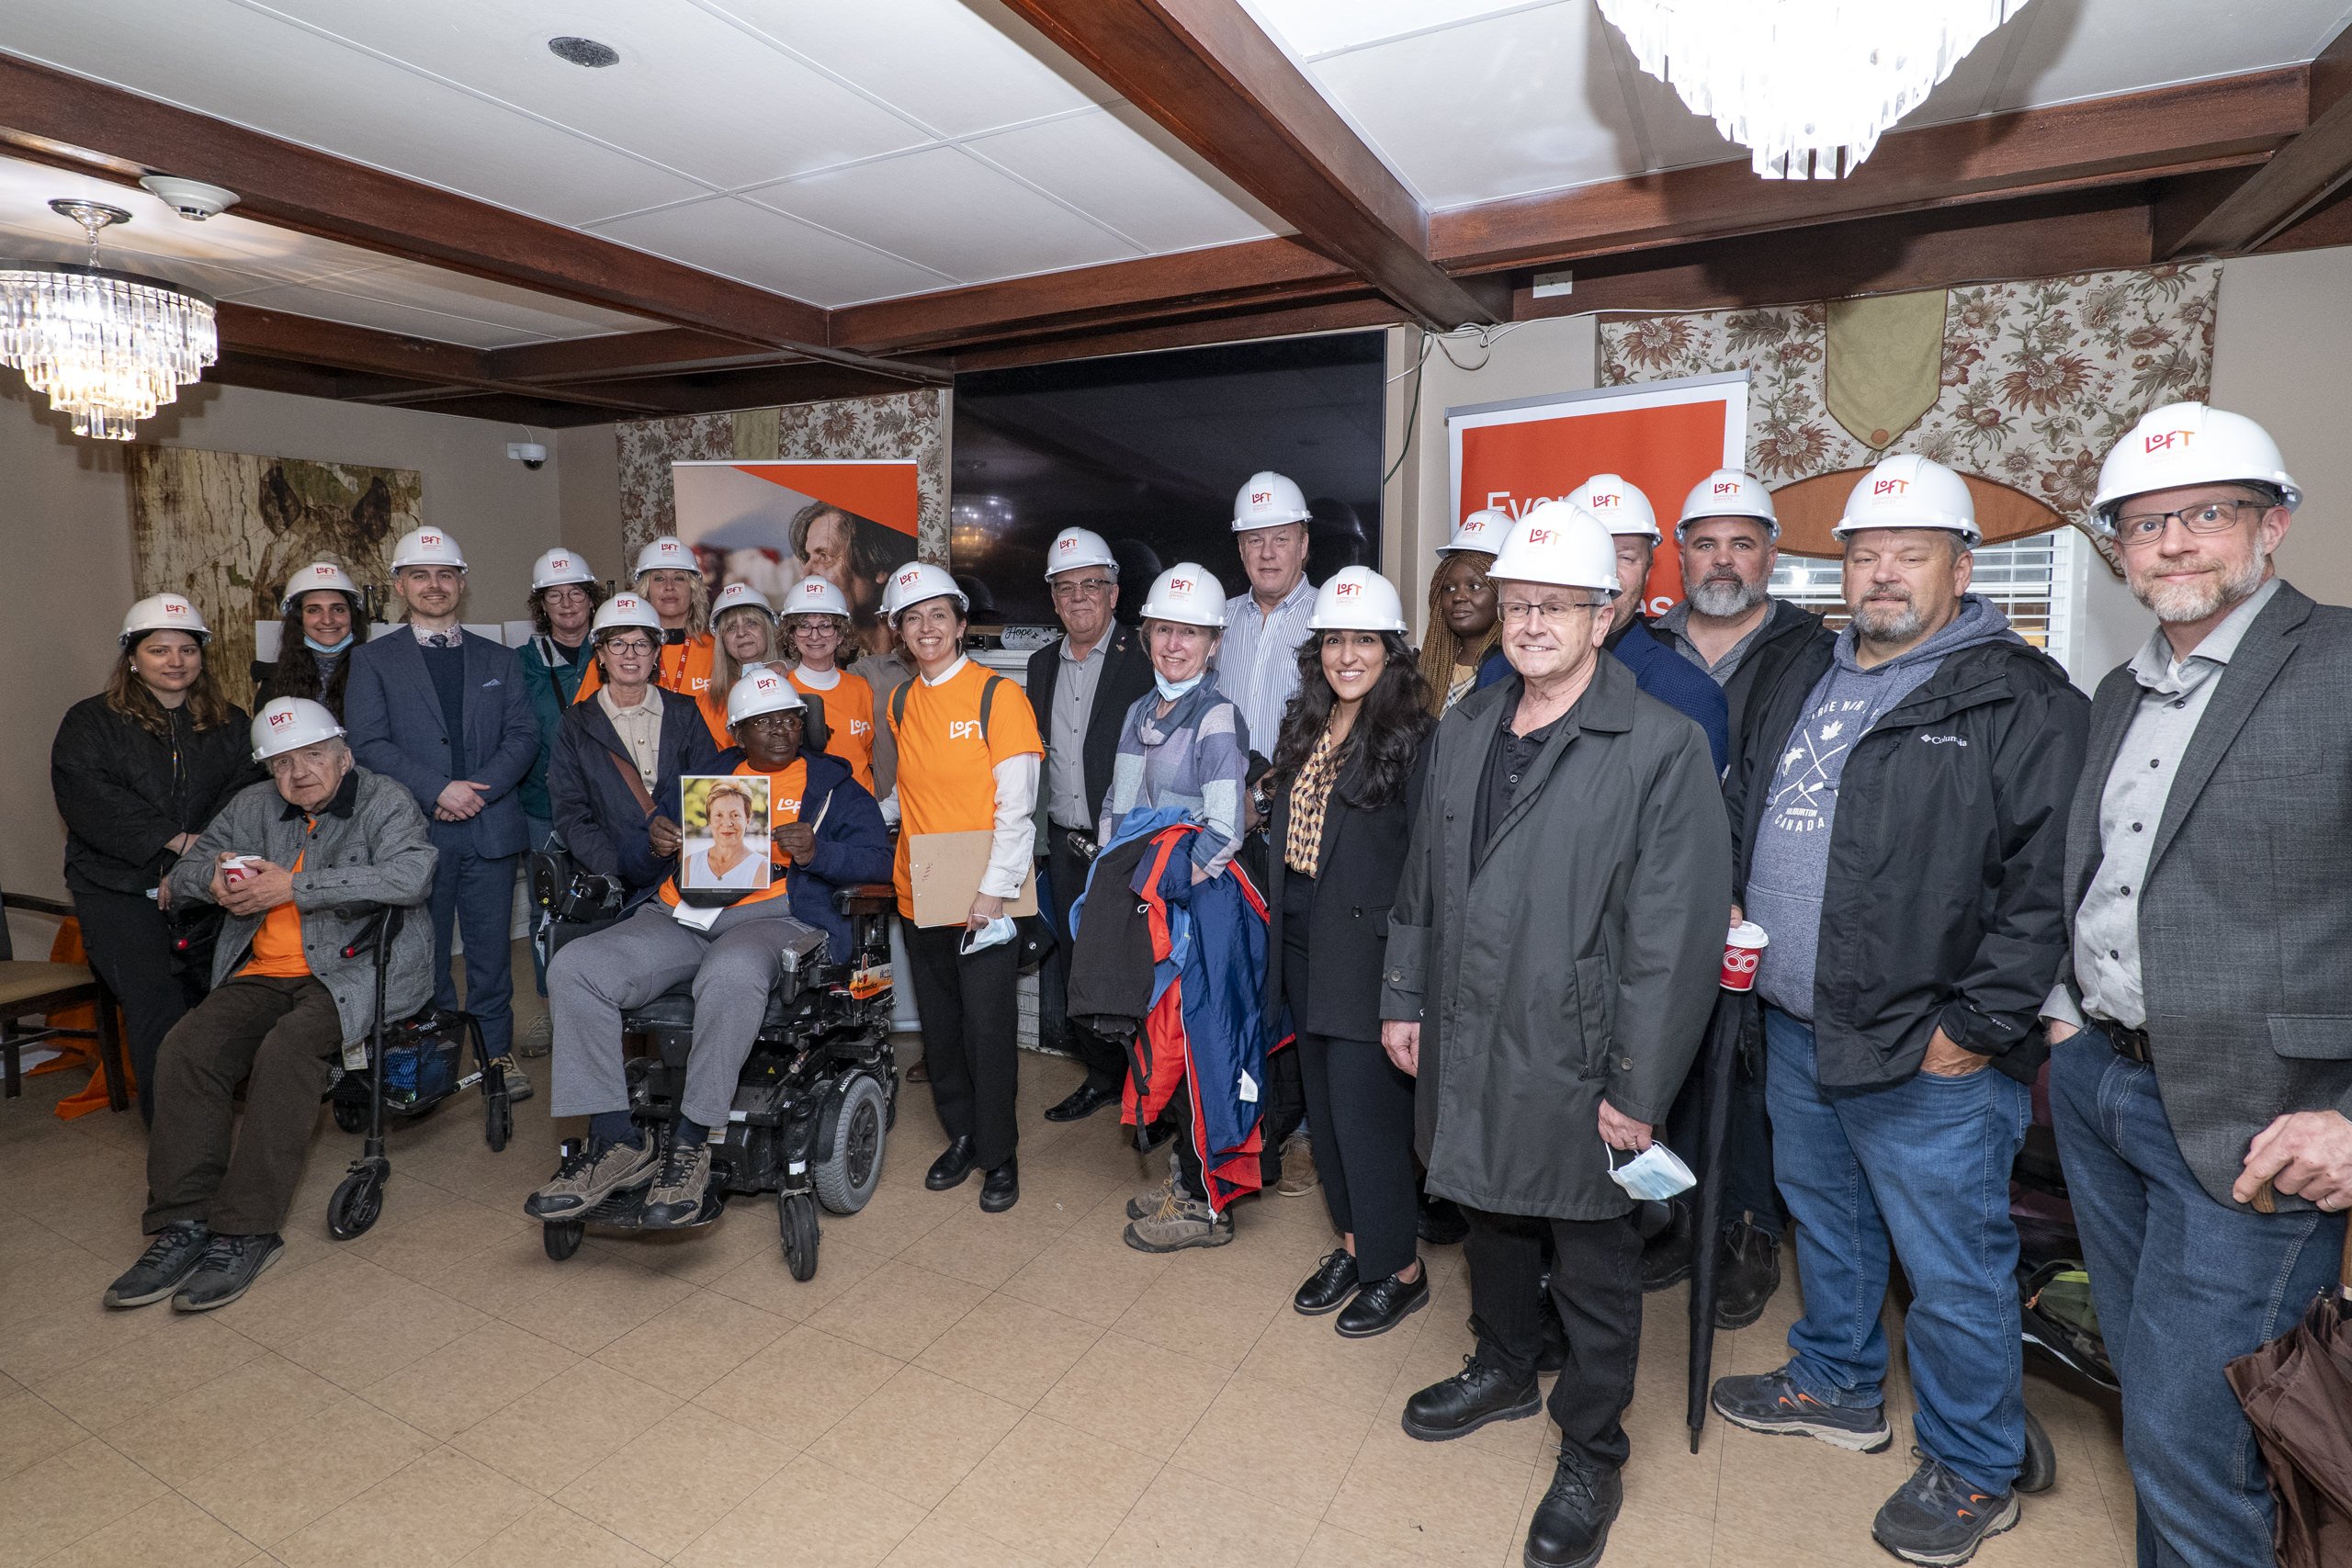 Mayor James Leduc, LOFT Community Service workers, and residents wearing hard hats smiling beside a development sign gathered together outside of the future LOFT Bradford House inside of 31 Frederick Street.